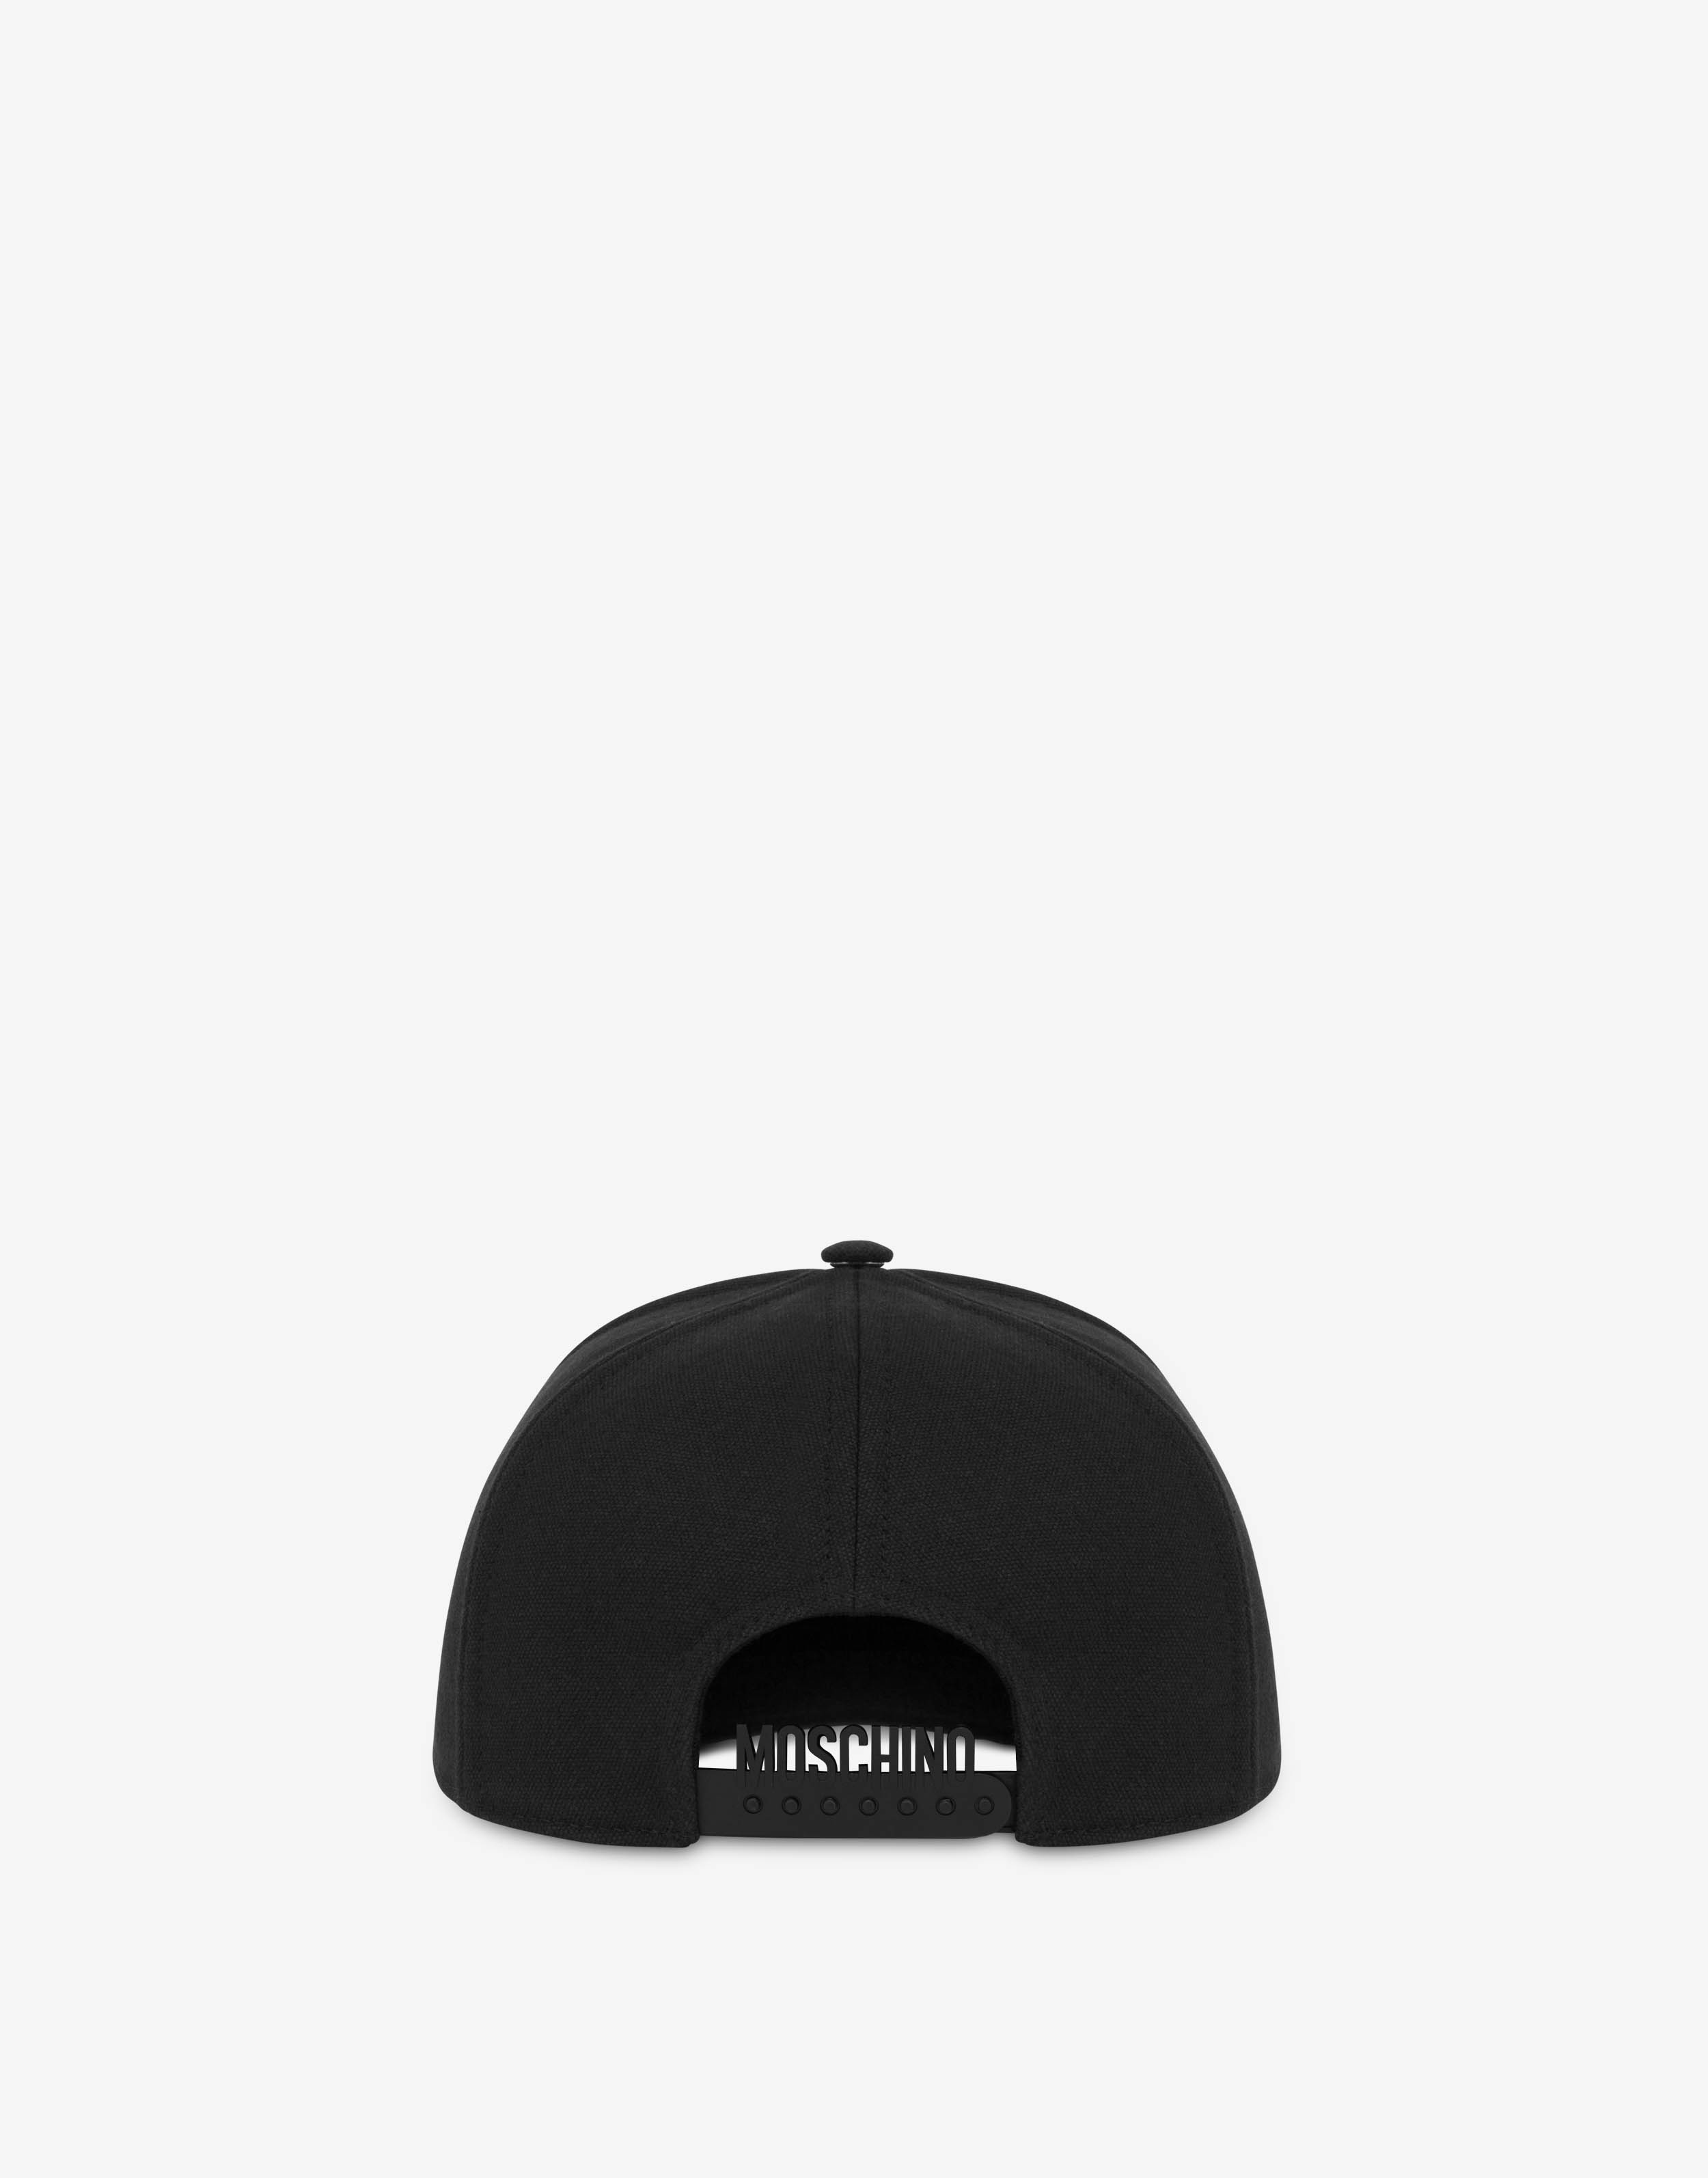 LOGO EMBROIDERY CANVAS HAT - 3